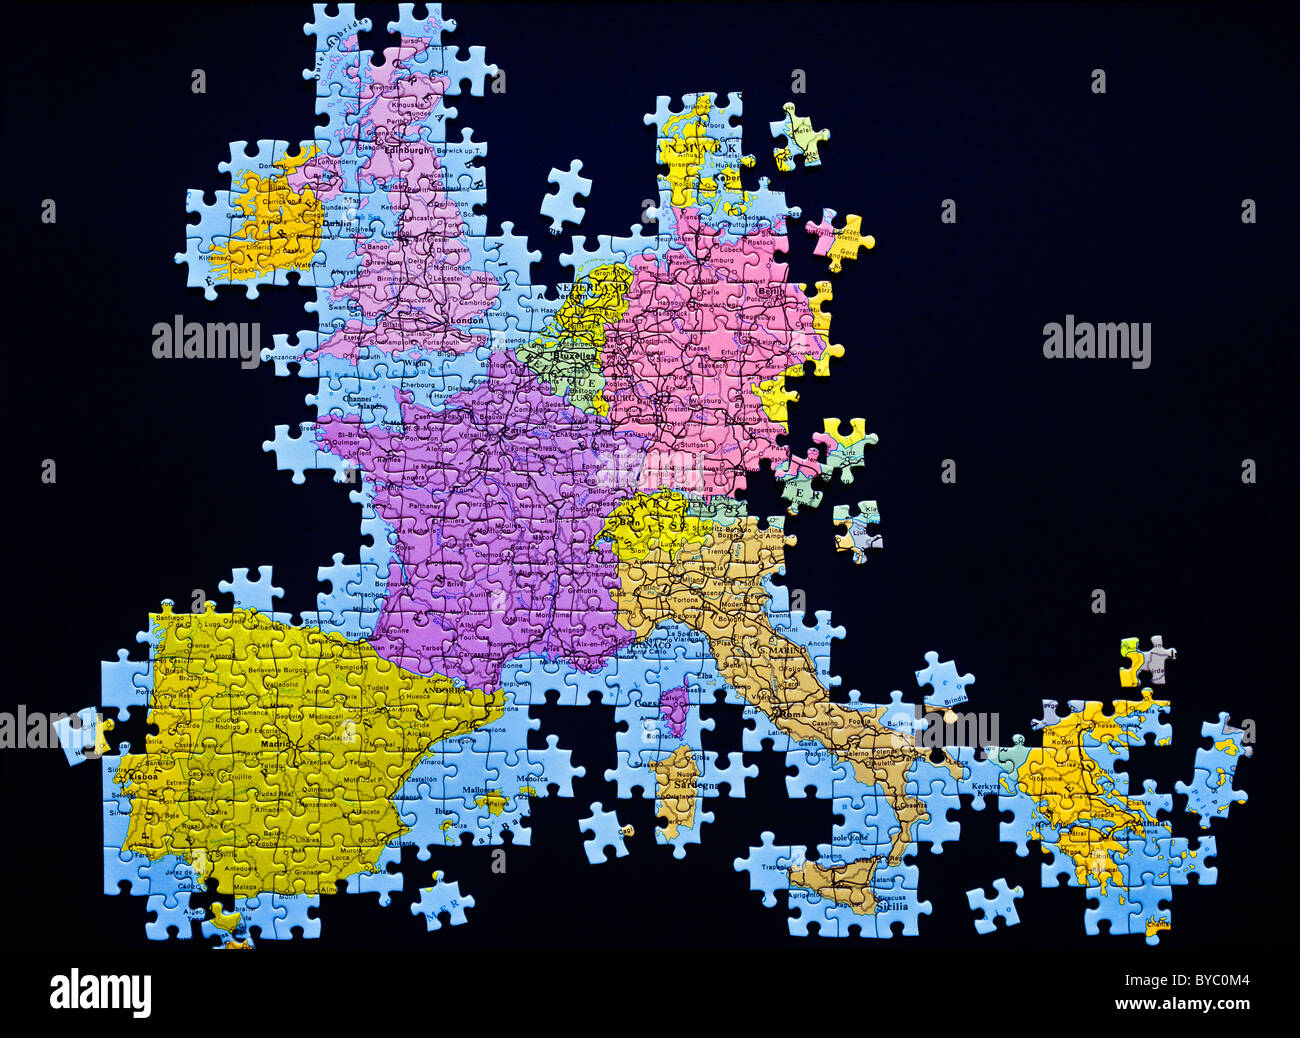 MAP OF EUROPE MADE WITH JIGSAW PUZZLE PIECES Stock Photo